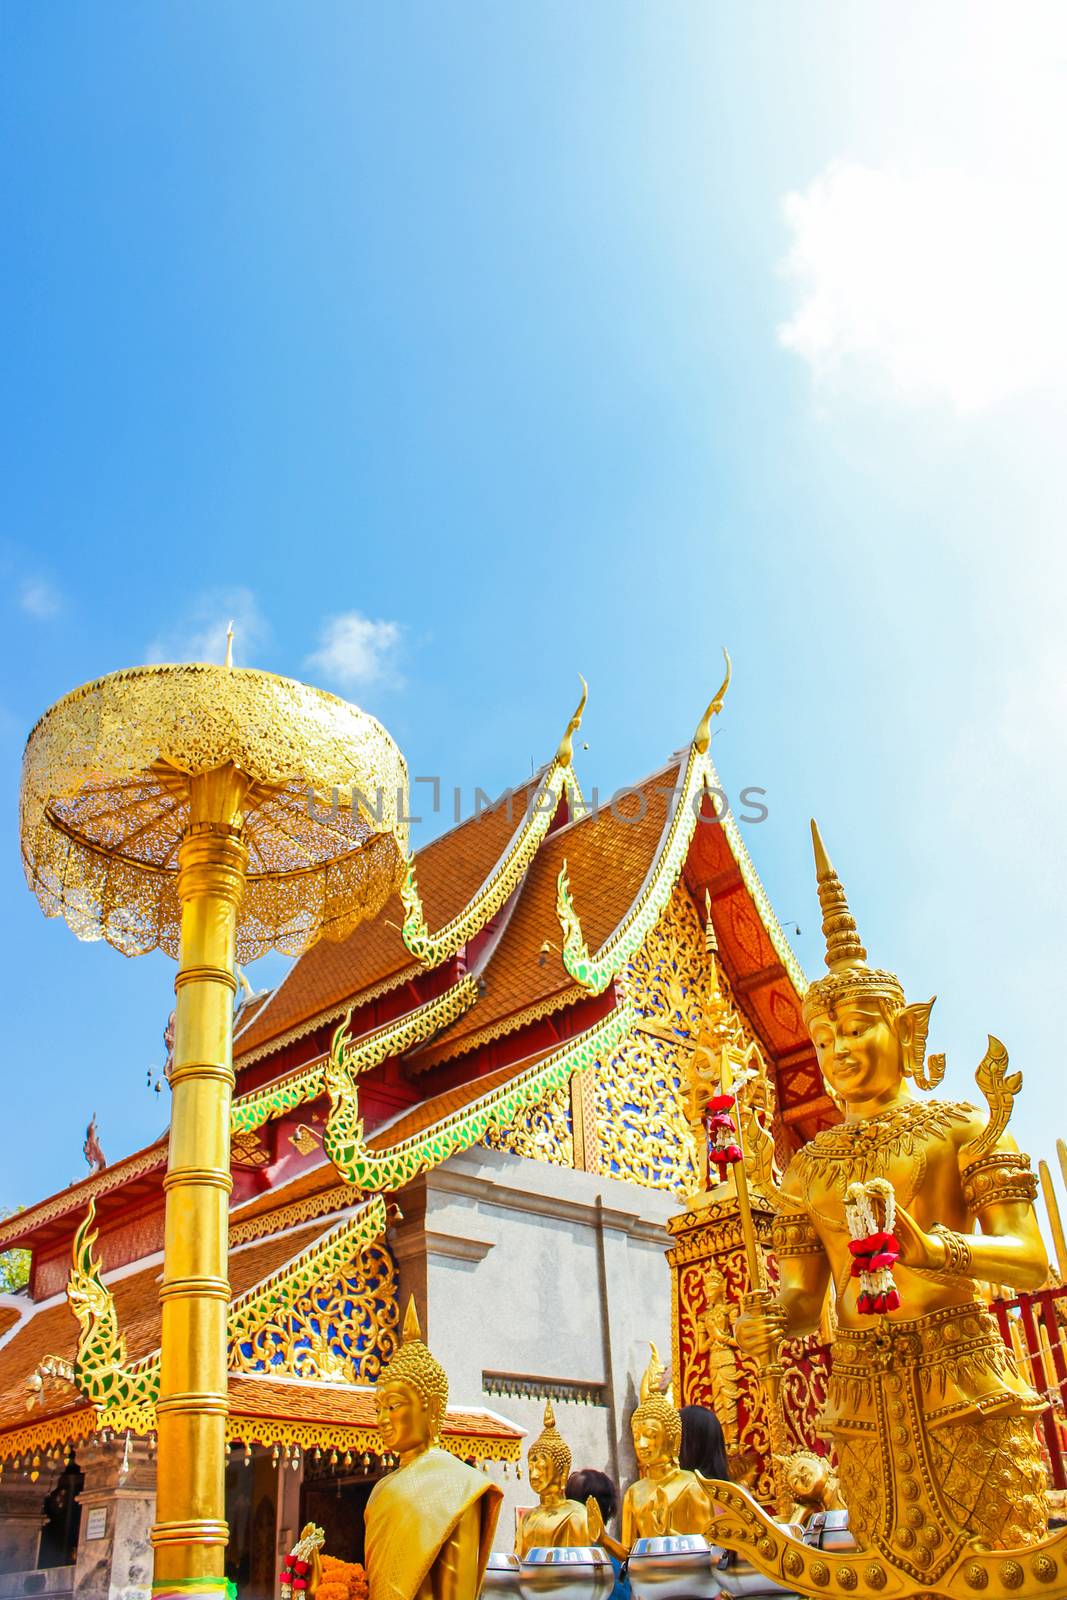 Golden building and umbrella in Wat Phra That Doi Suthep is the popular tourist destination of Chiang Mai, Thailand. by prapstock